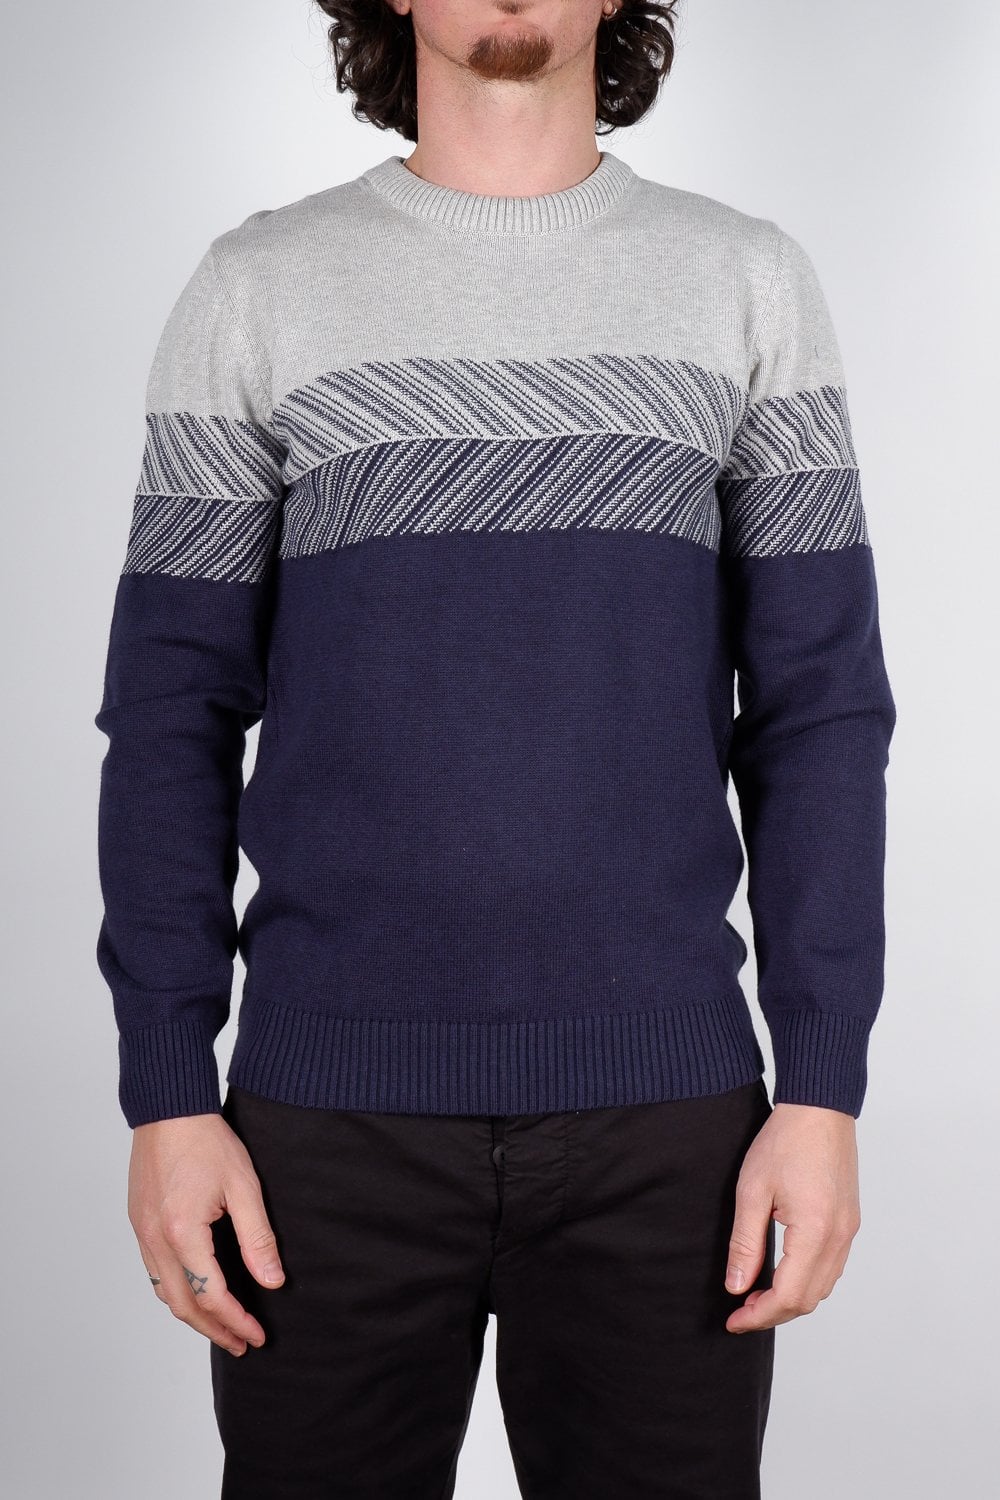 Buy the Remus Uomo 58657 Crew Neck Sweater in Navy/Grey at Intro. Spend £50 for free UK delivery. Official stockists. We ship worldwide.